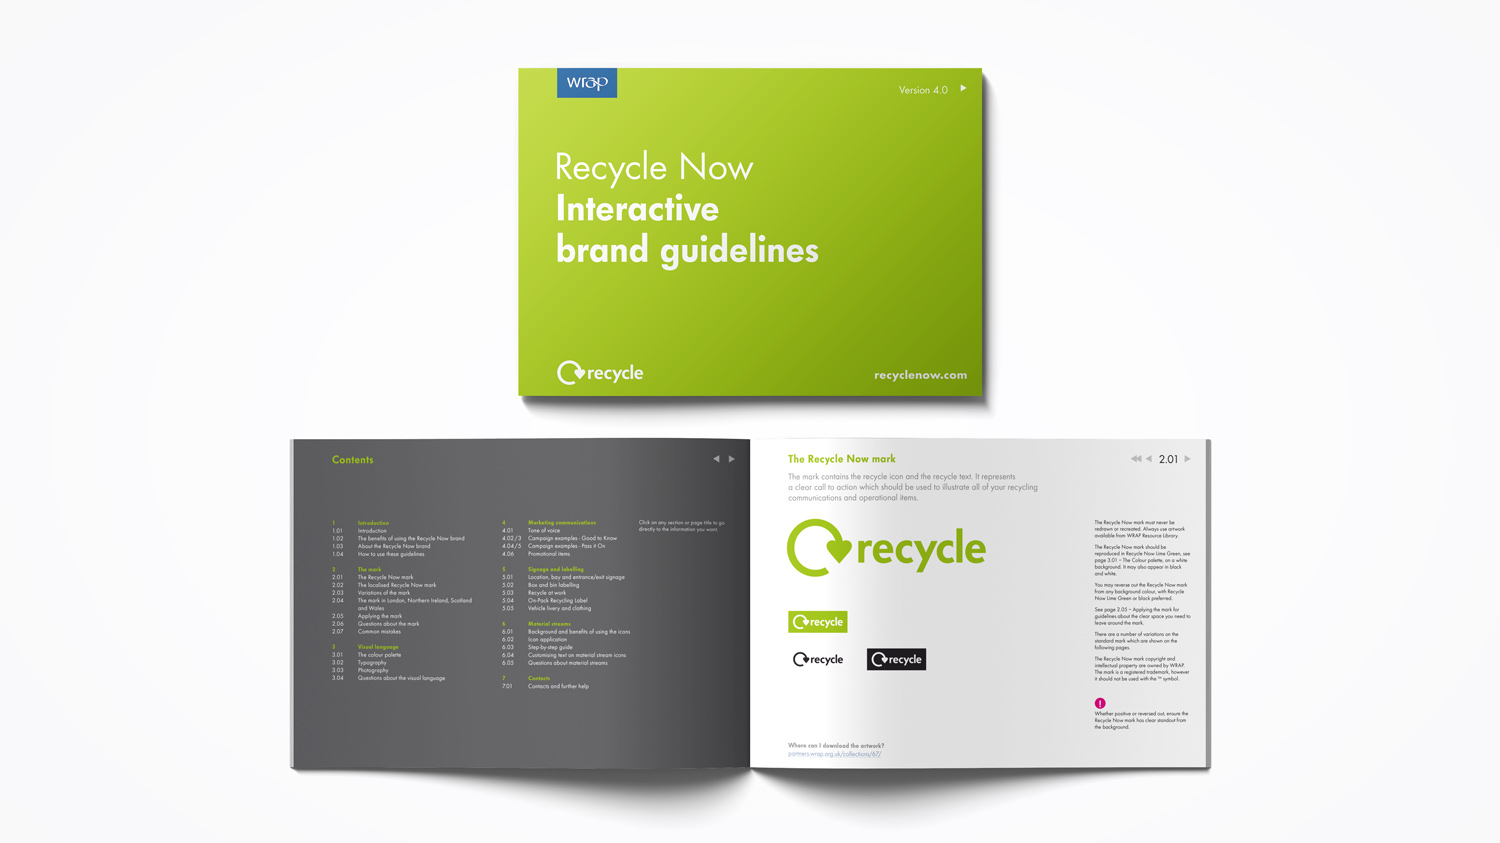 recycle-now-brand-guidleines-cover-and-spread-get-it-sorted.jpg